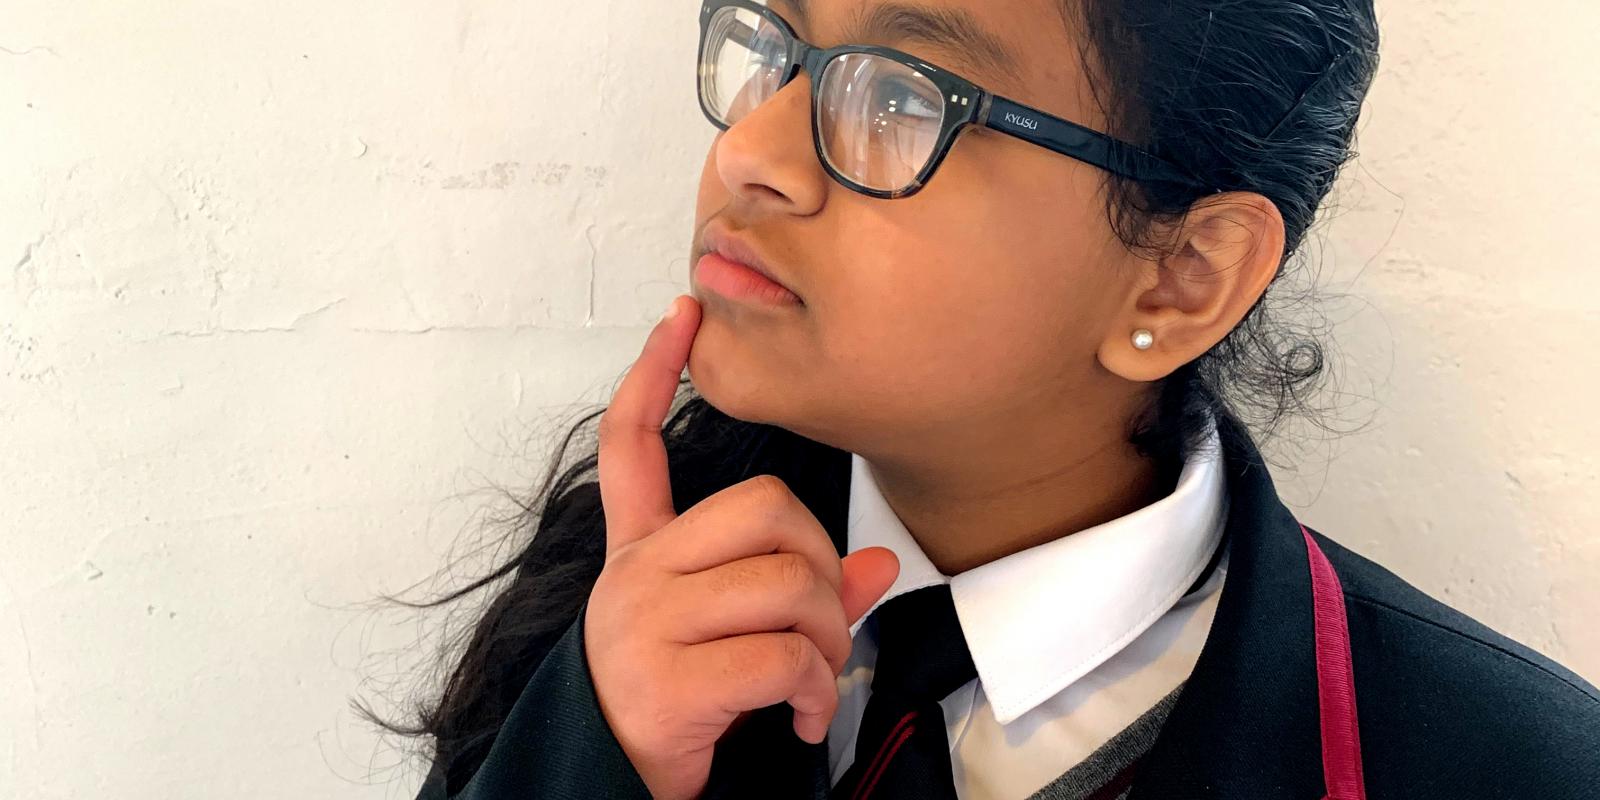 school girl with finger on chin as if inquisitively thinking